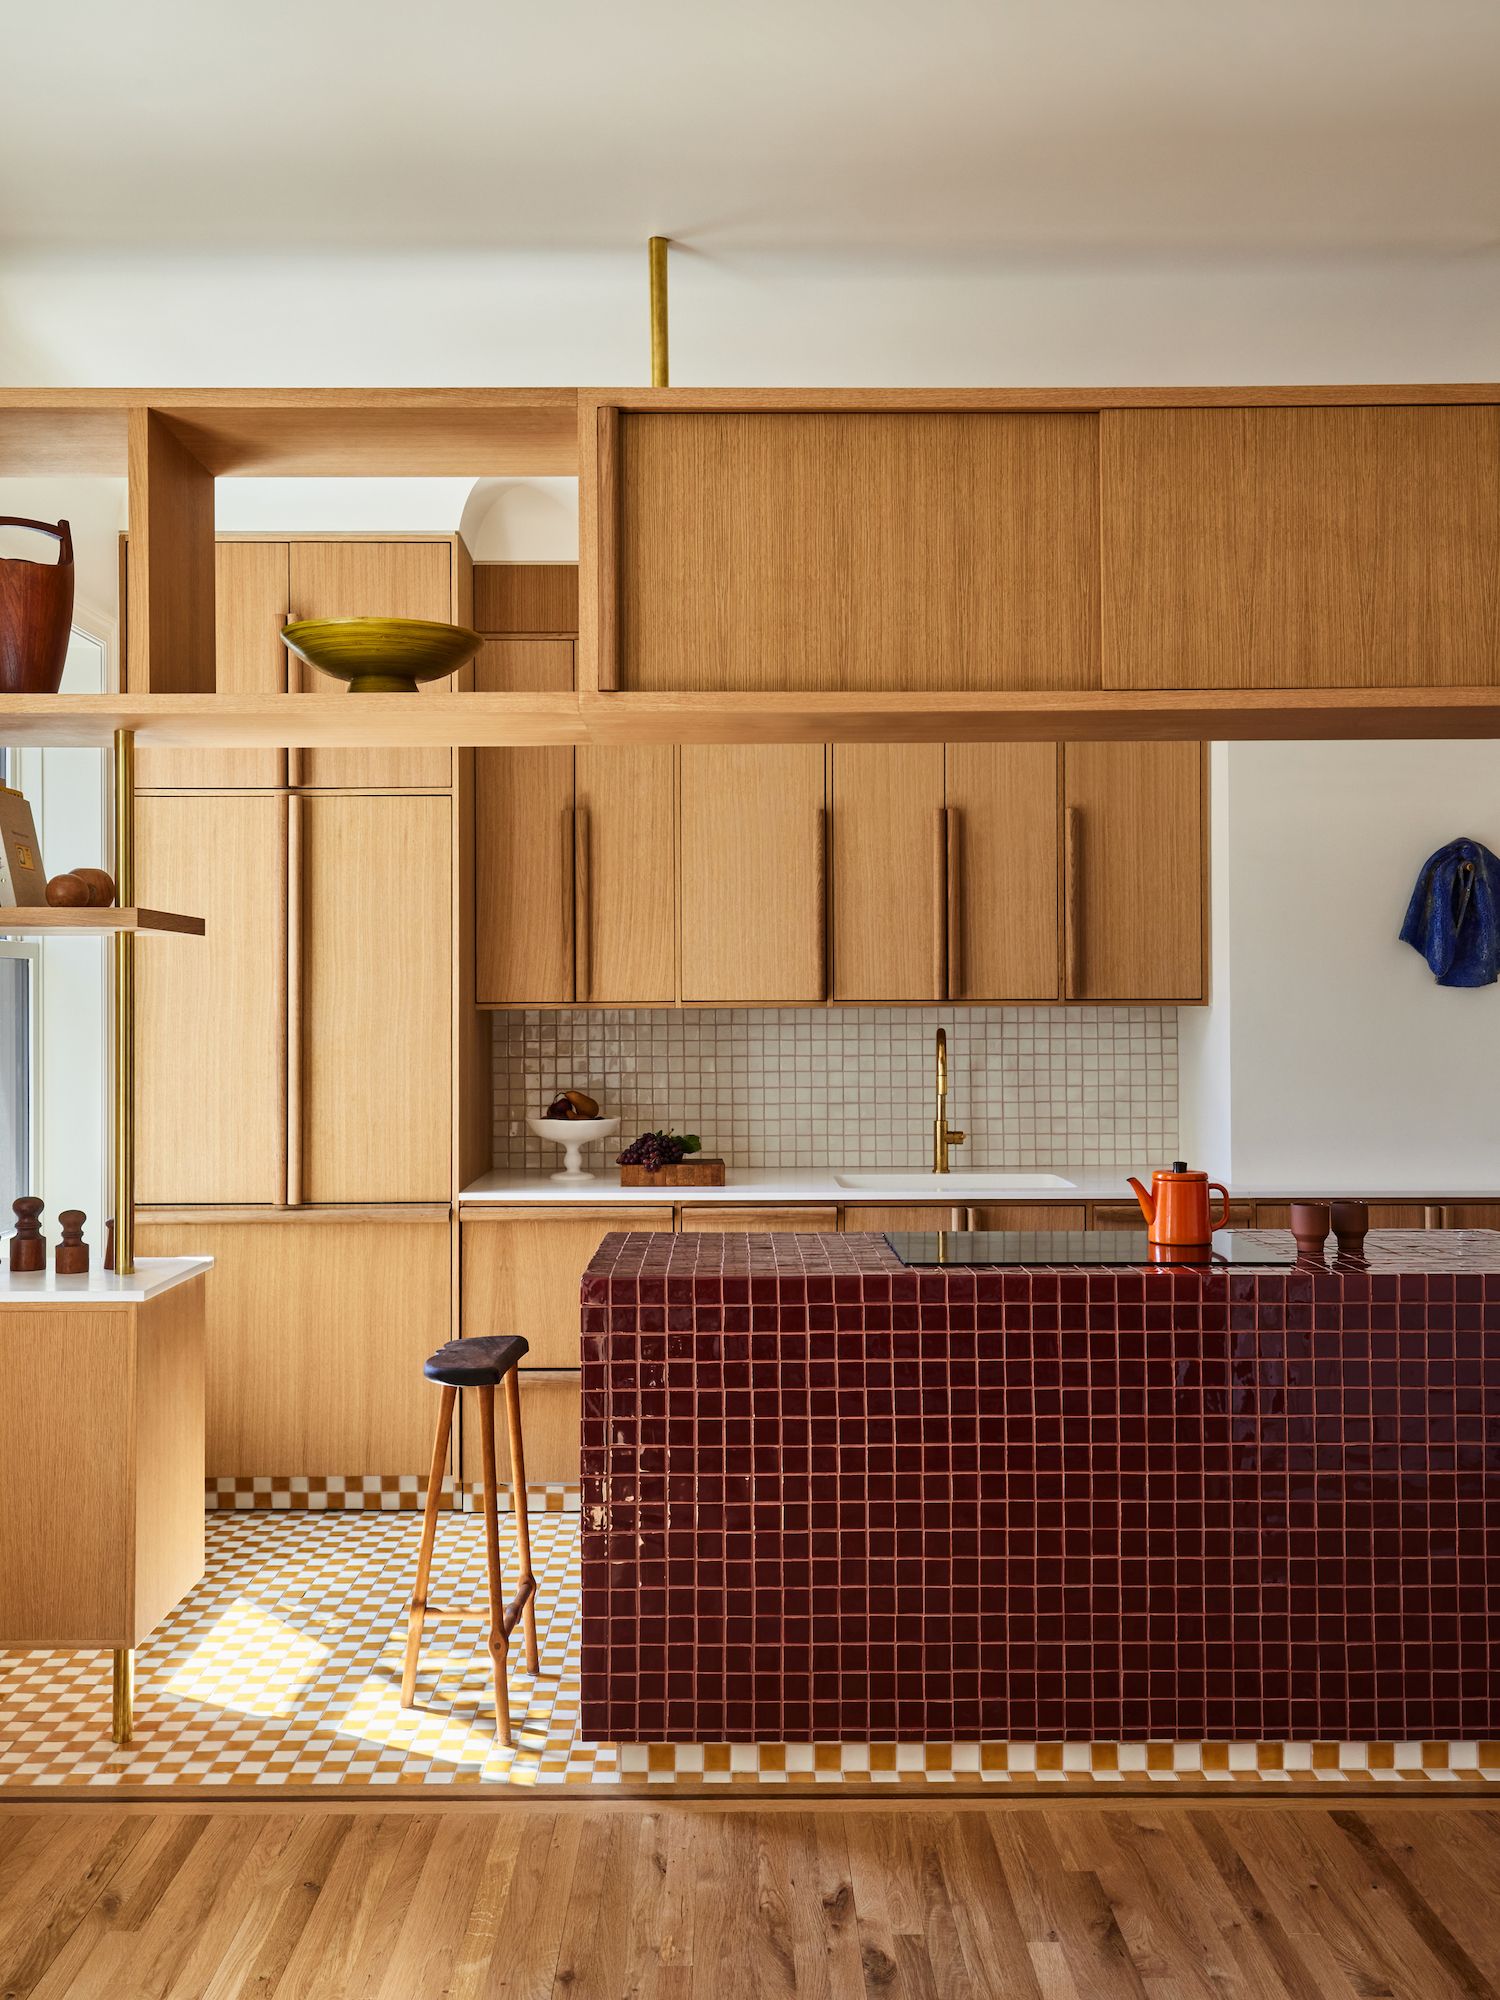 Creative Ways to Maximize Space in Your Apartment Kitchen